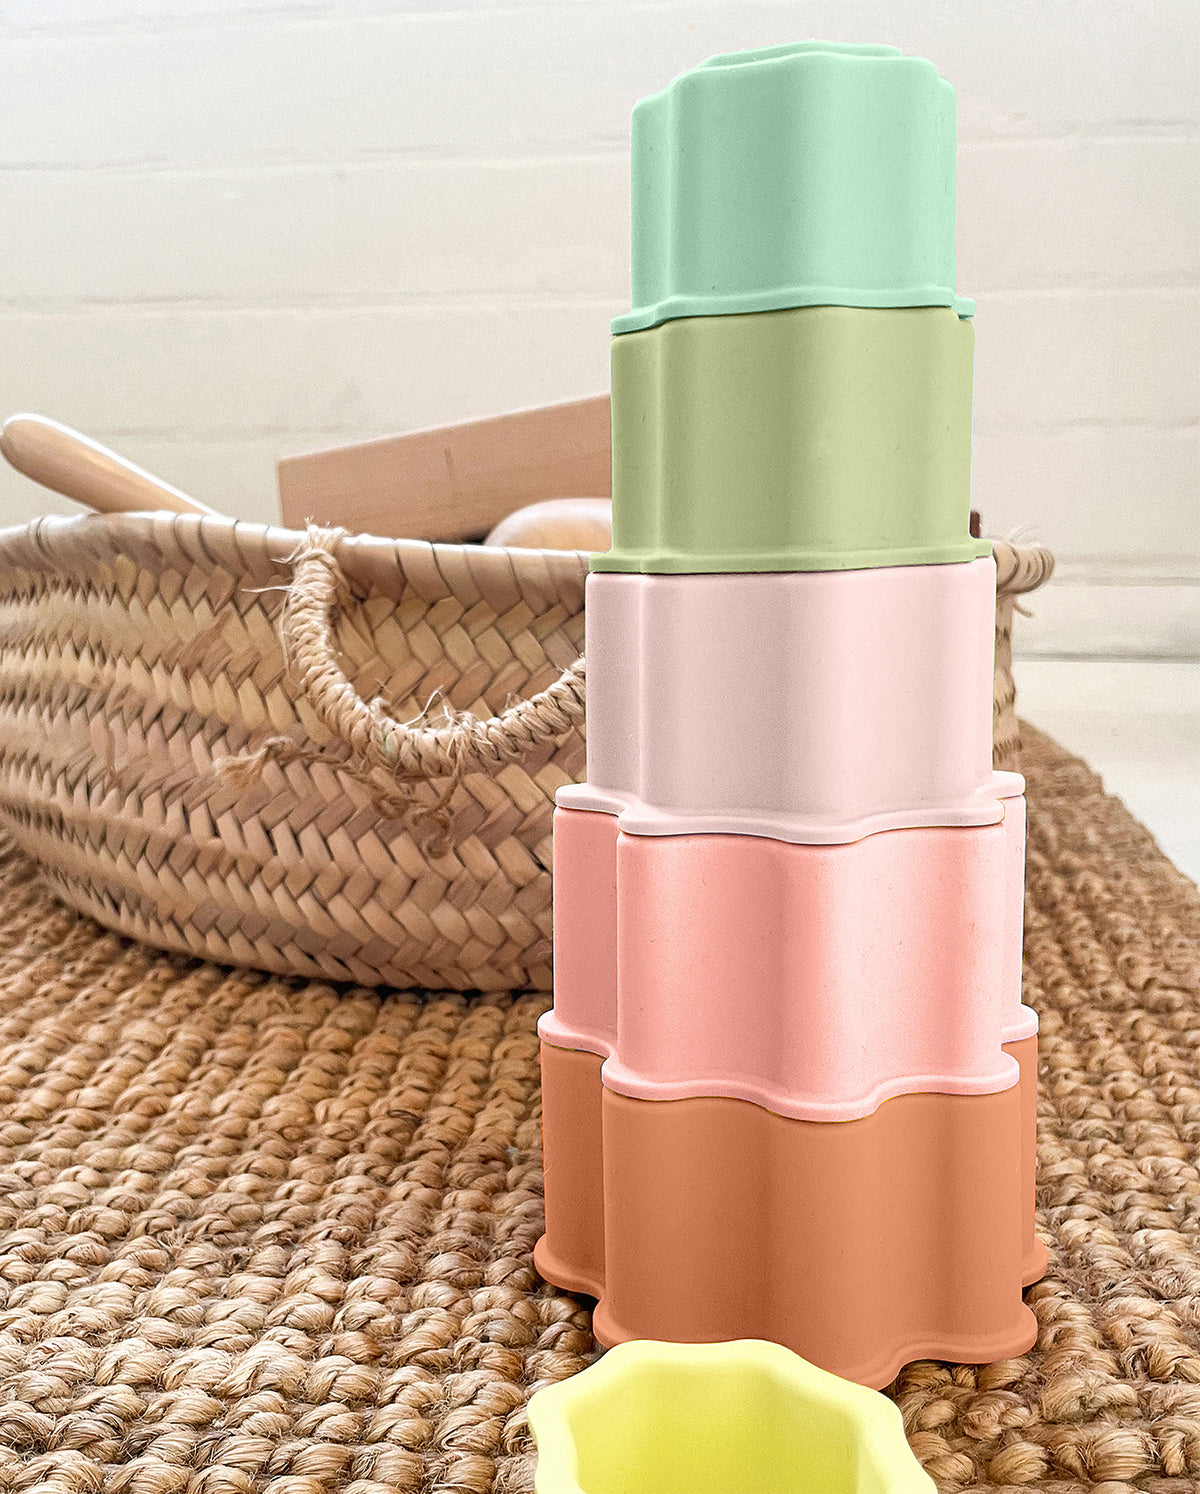 Silicone Stacking Tower Circus